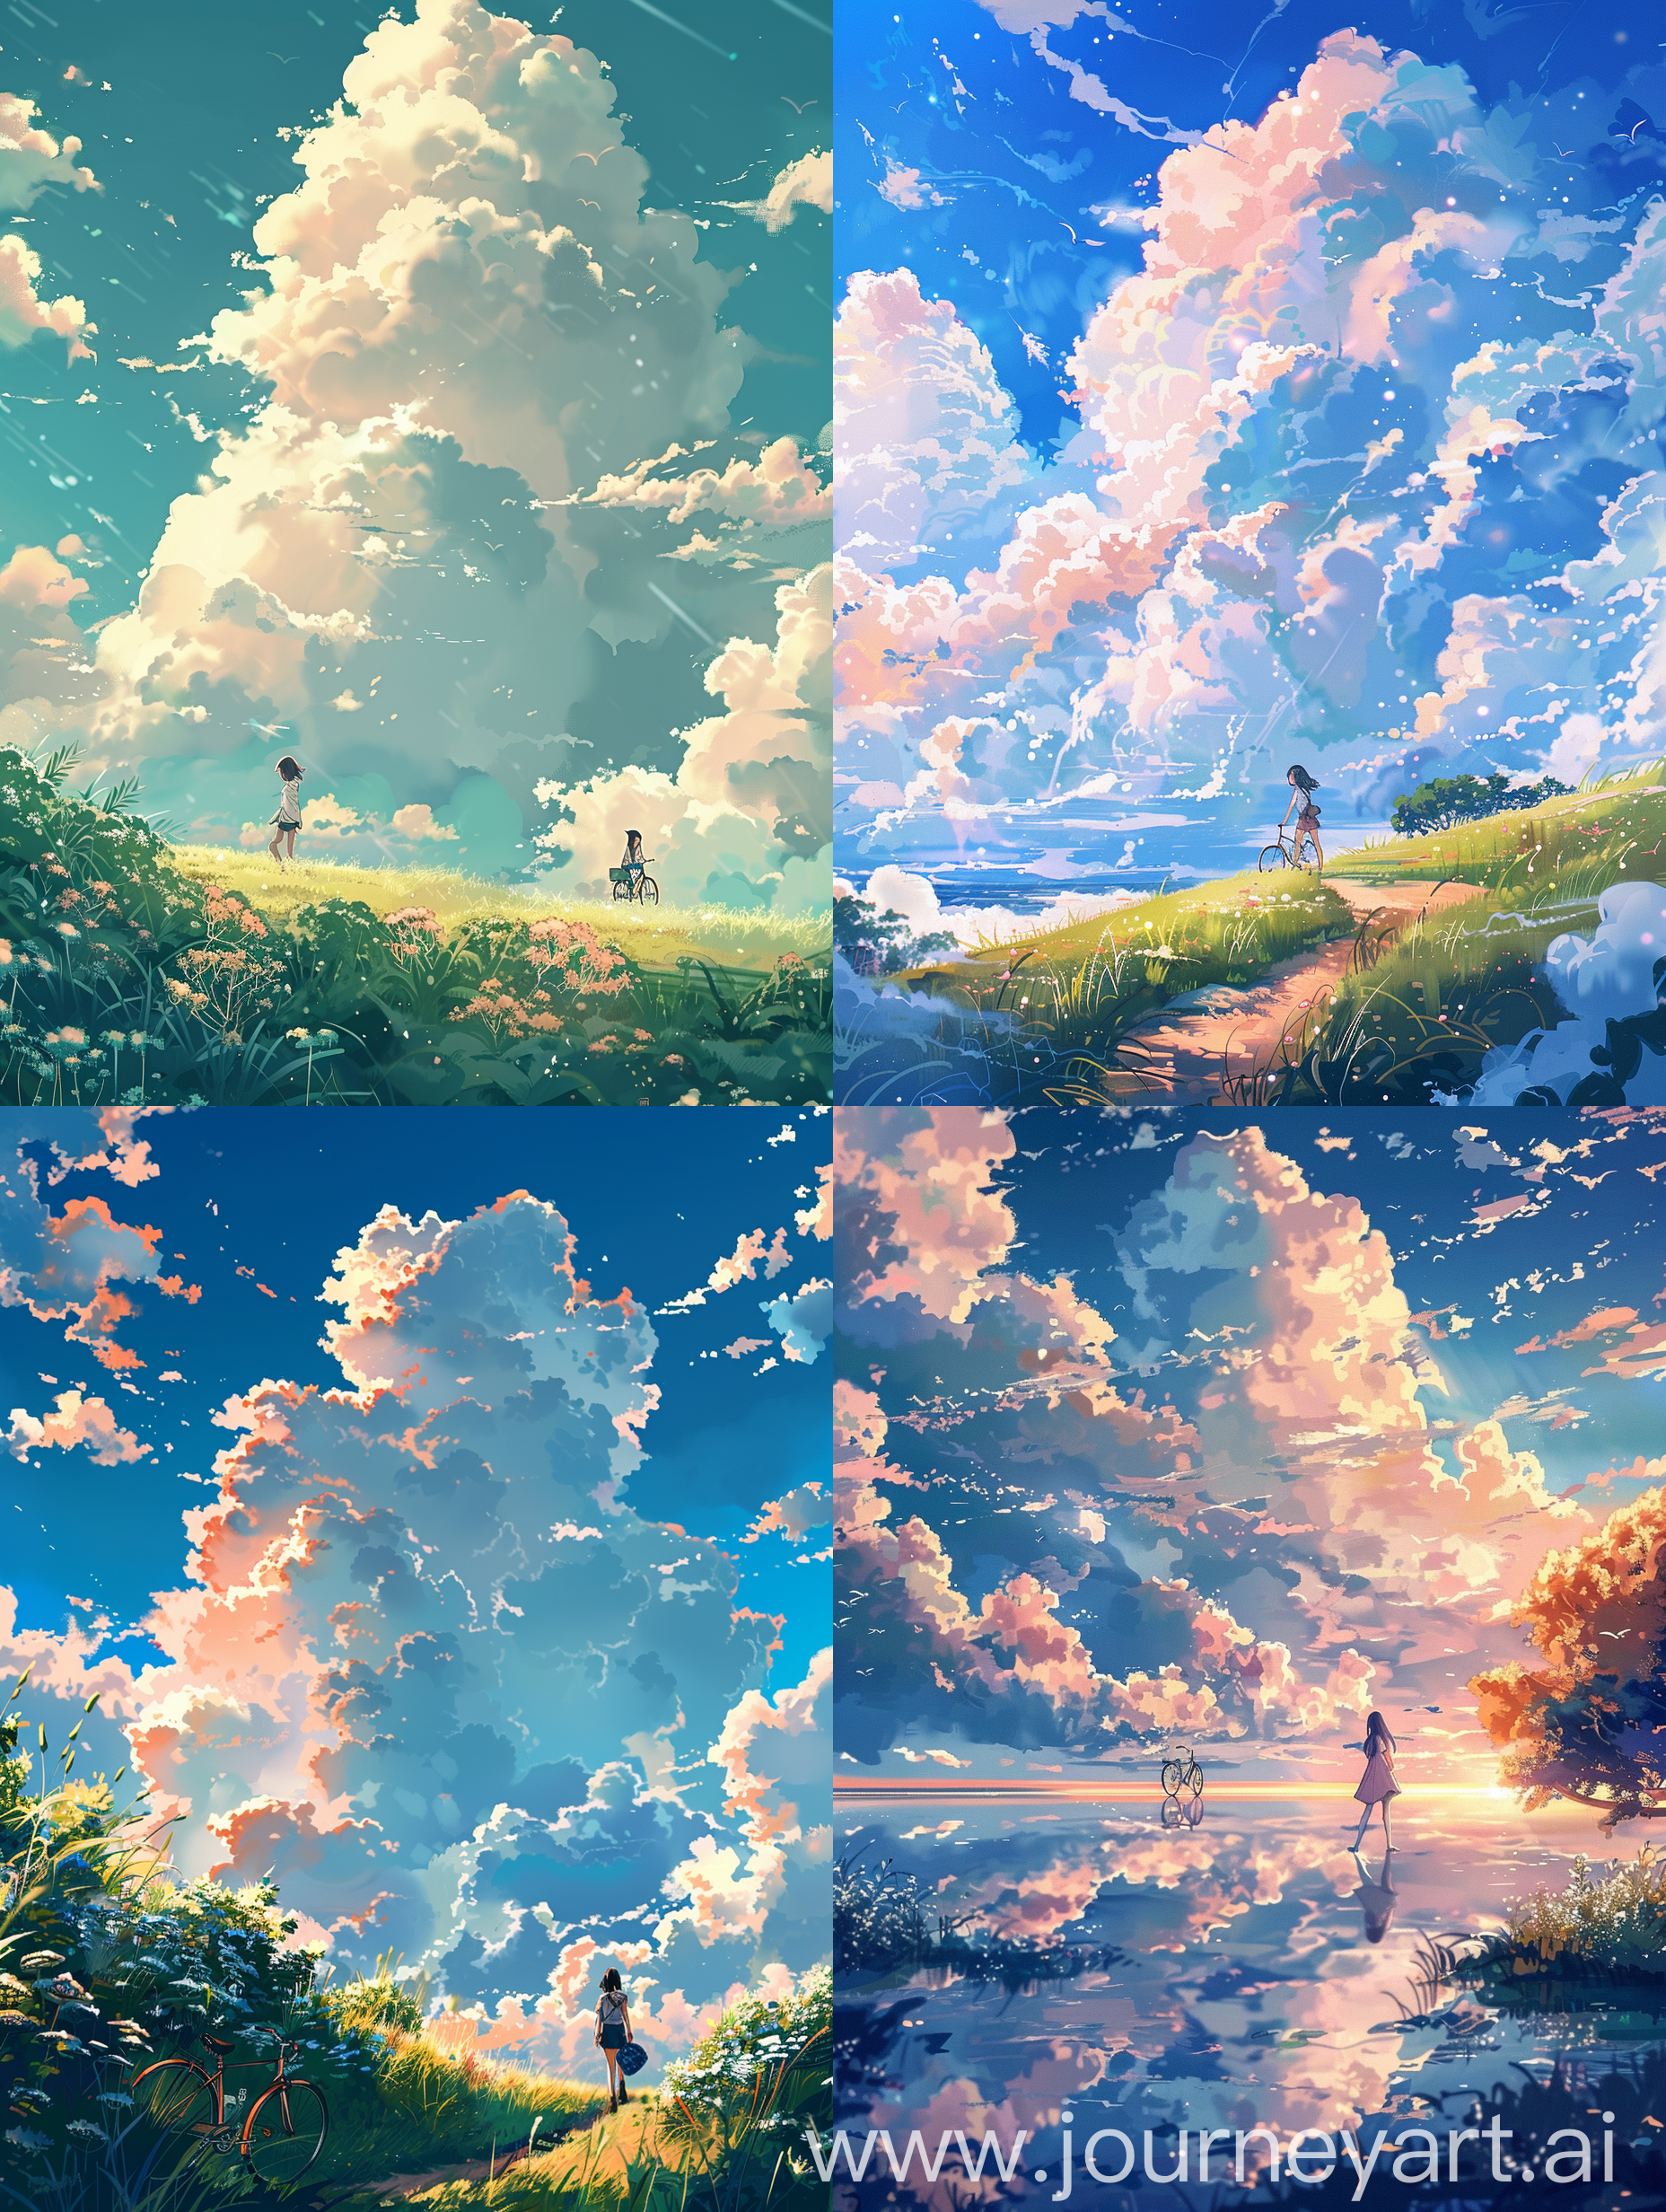 Anime style, clear clouds, clear environment, scenery, landscape, 1girl with biscycle at distance, cozy vibes